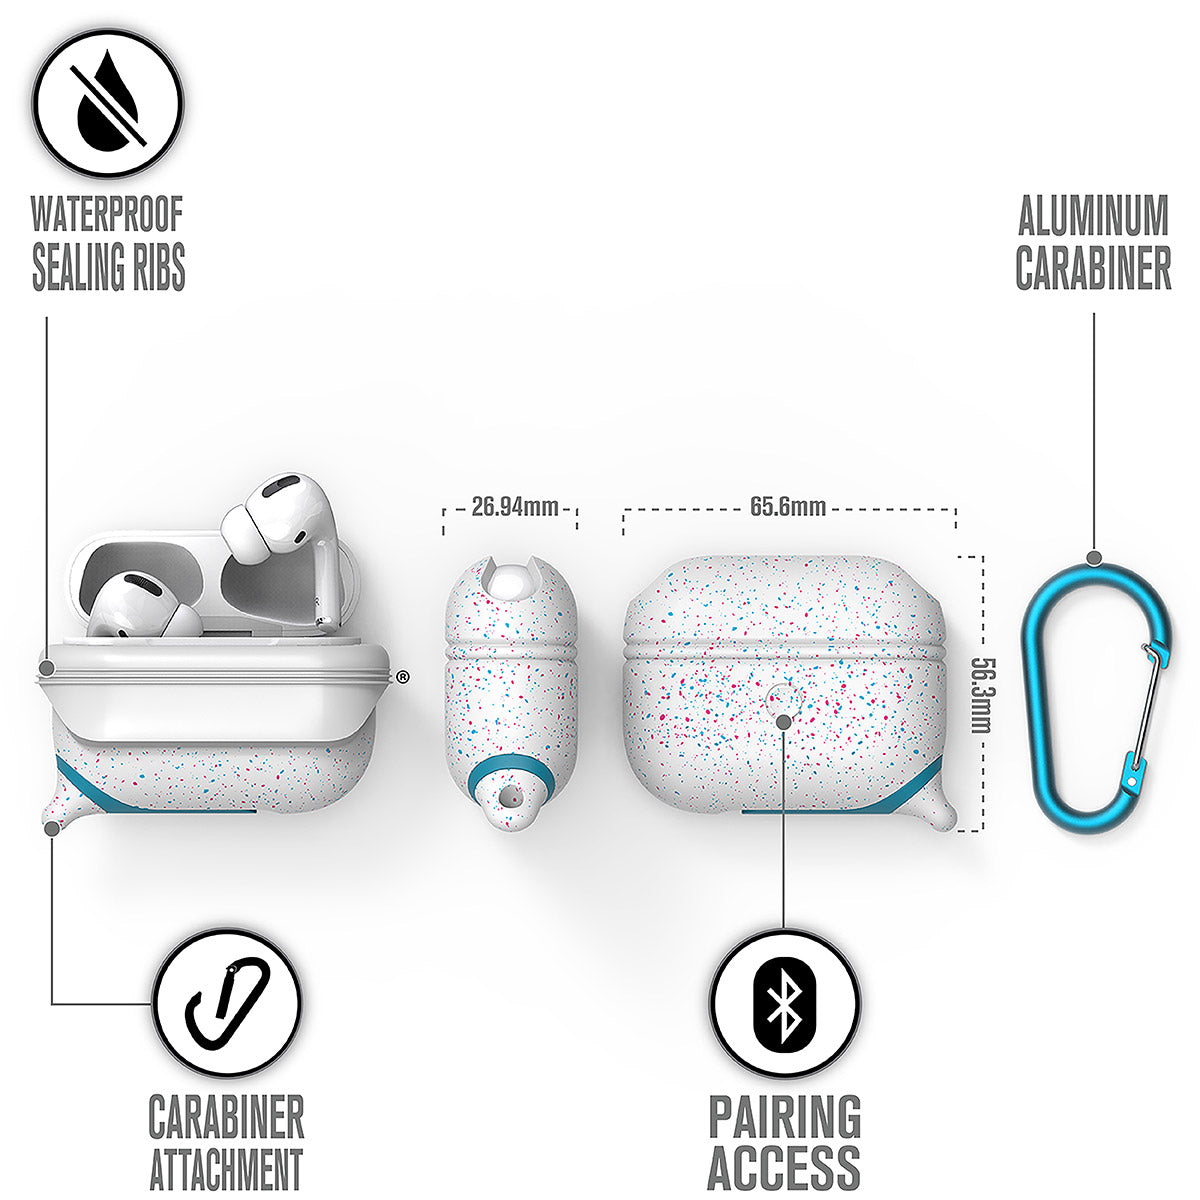 CATAPLAPDPROFUN | catalyst airpods pro gen 2 1 waterproof case carabiner special edition funfetti different views showing the sealing ribs carabiner attachment loop and pairing access text reads waterproof sealing ribs aluminum carabiner carabiner attachment pairing access